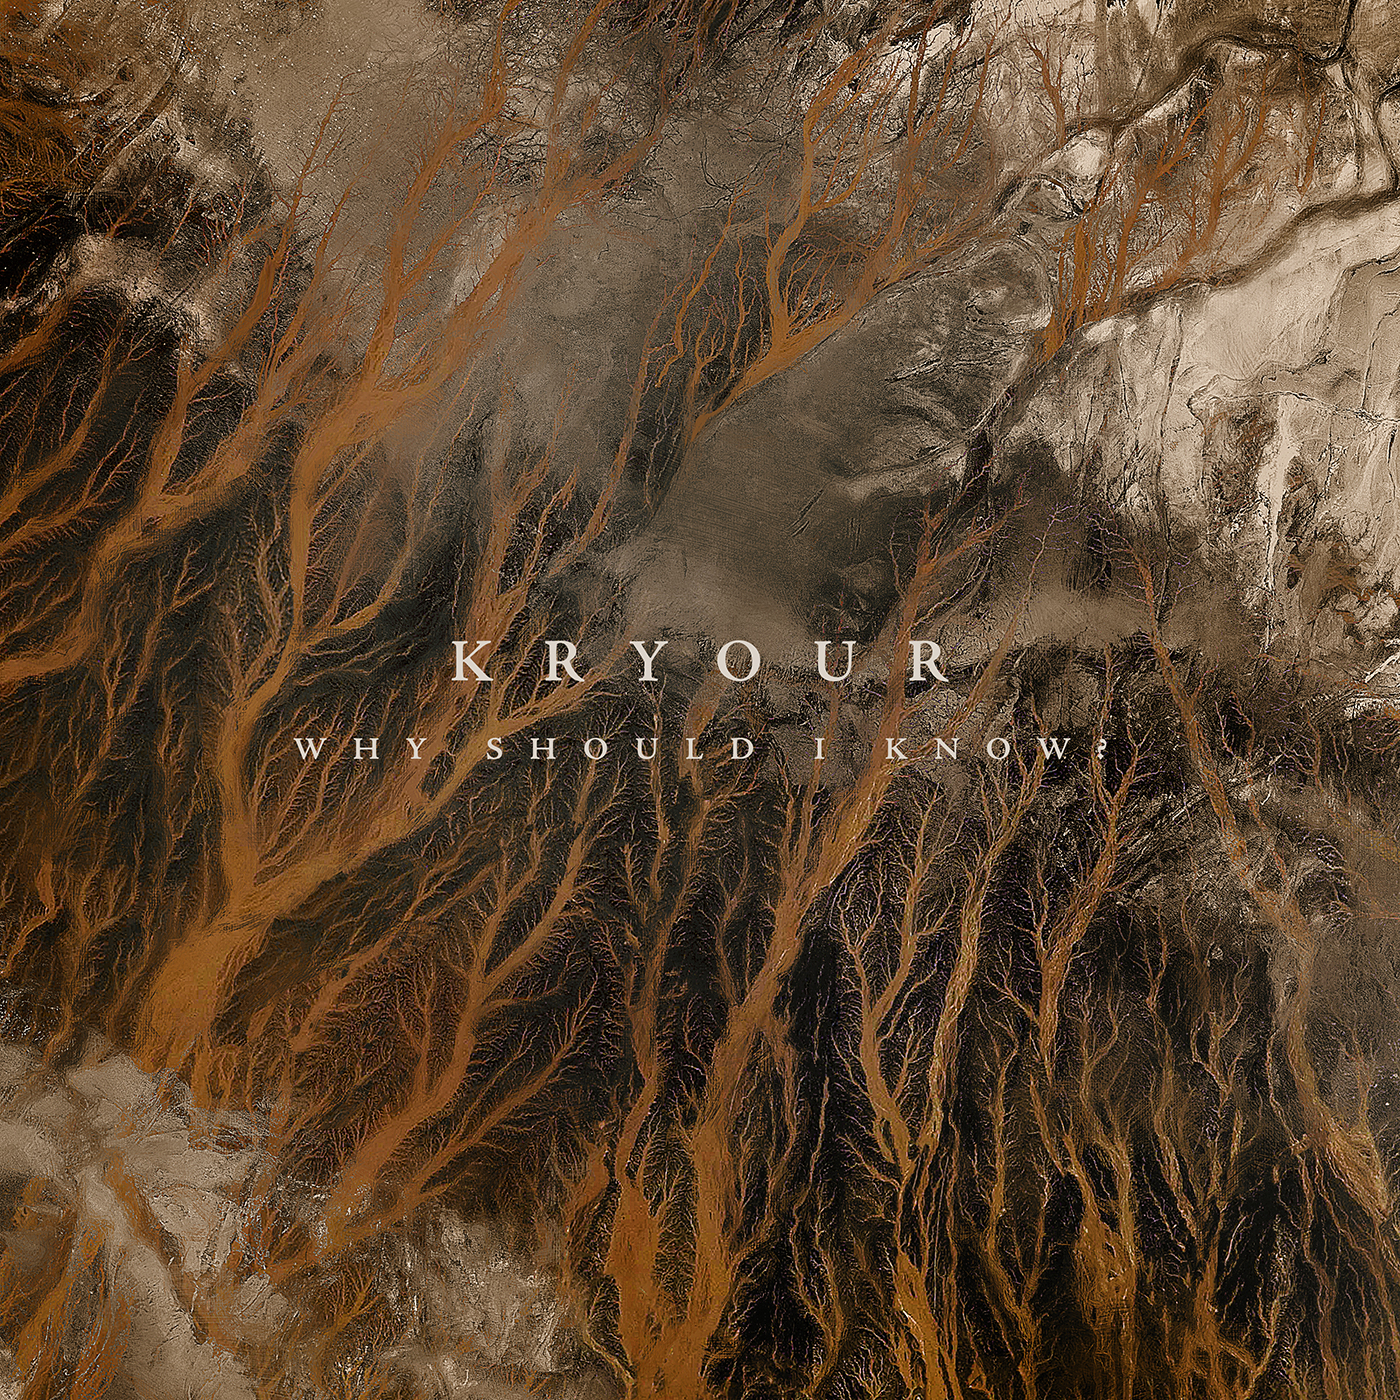 Addressing human values and resilience with metal glory, ‘Kryour’ return in style with dreamy and powerful new single “Why Should I Know?”.